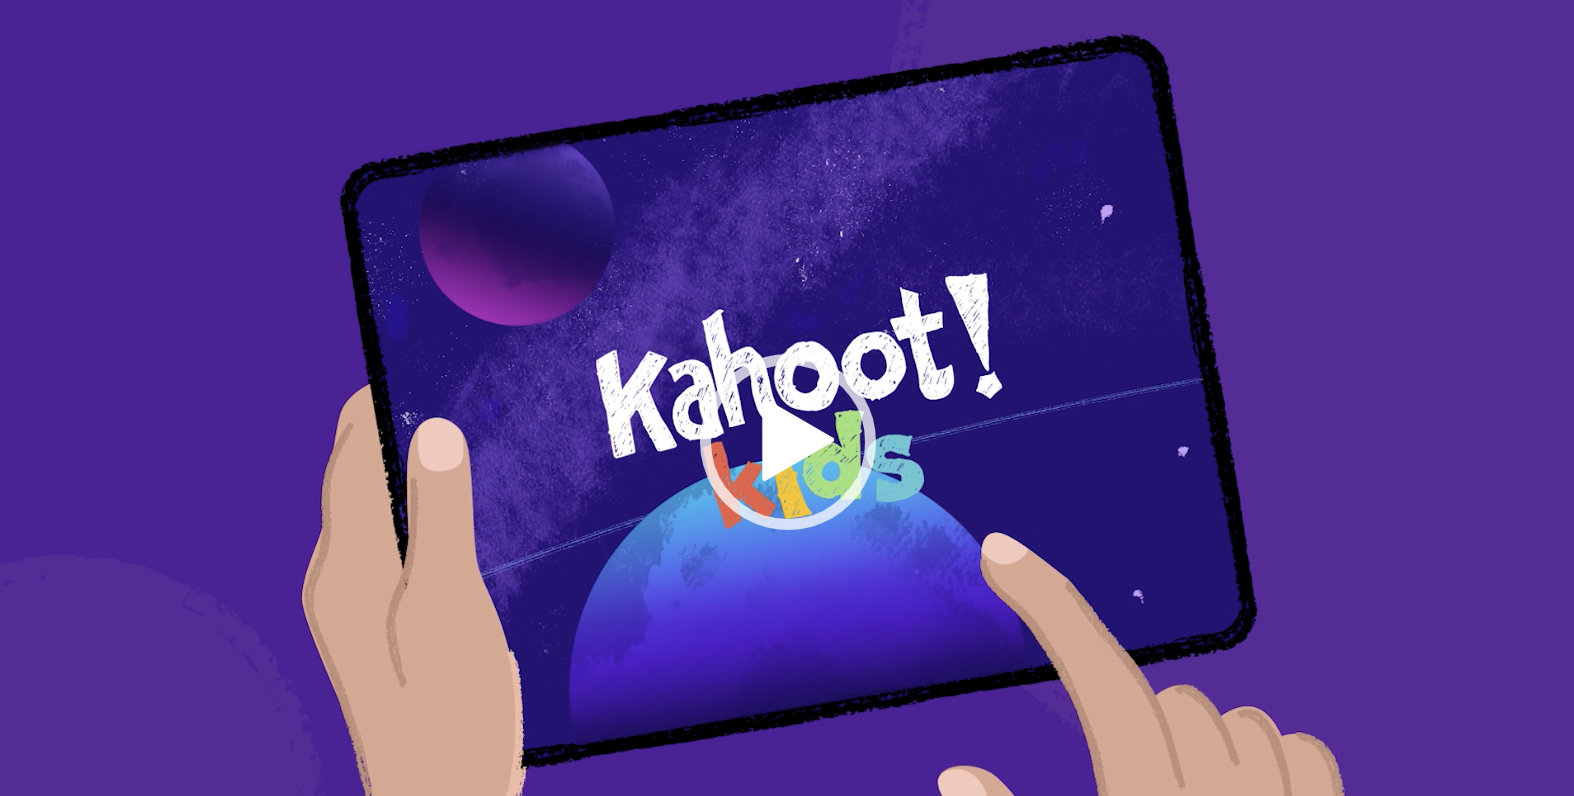 Kahoot!: Kid's Game That All the Fortune 500 Companies Use